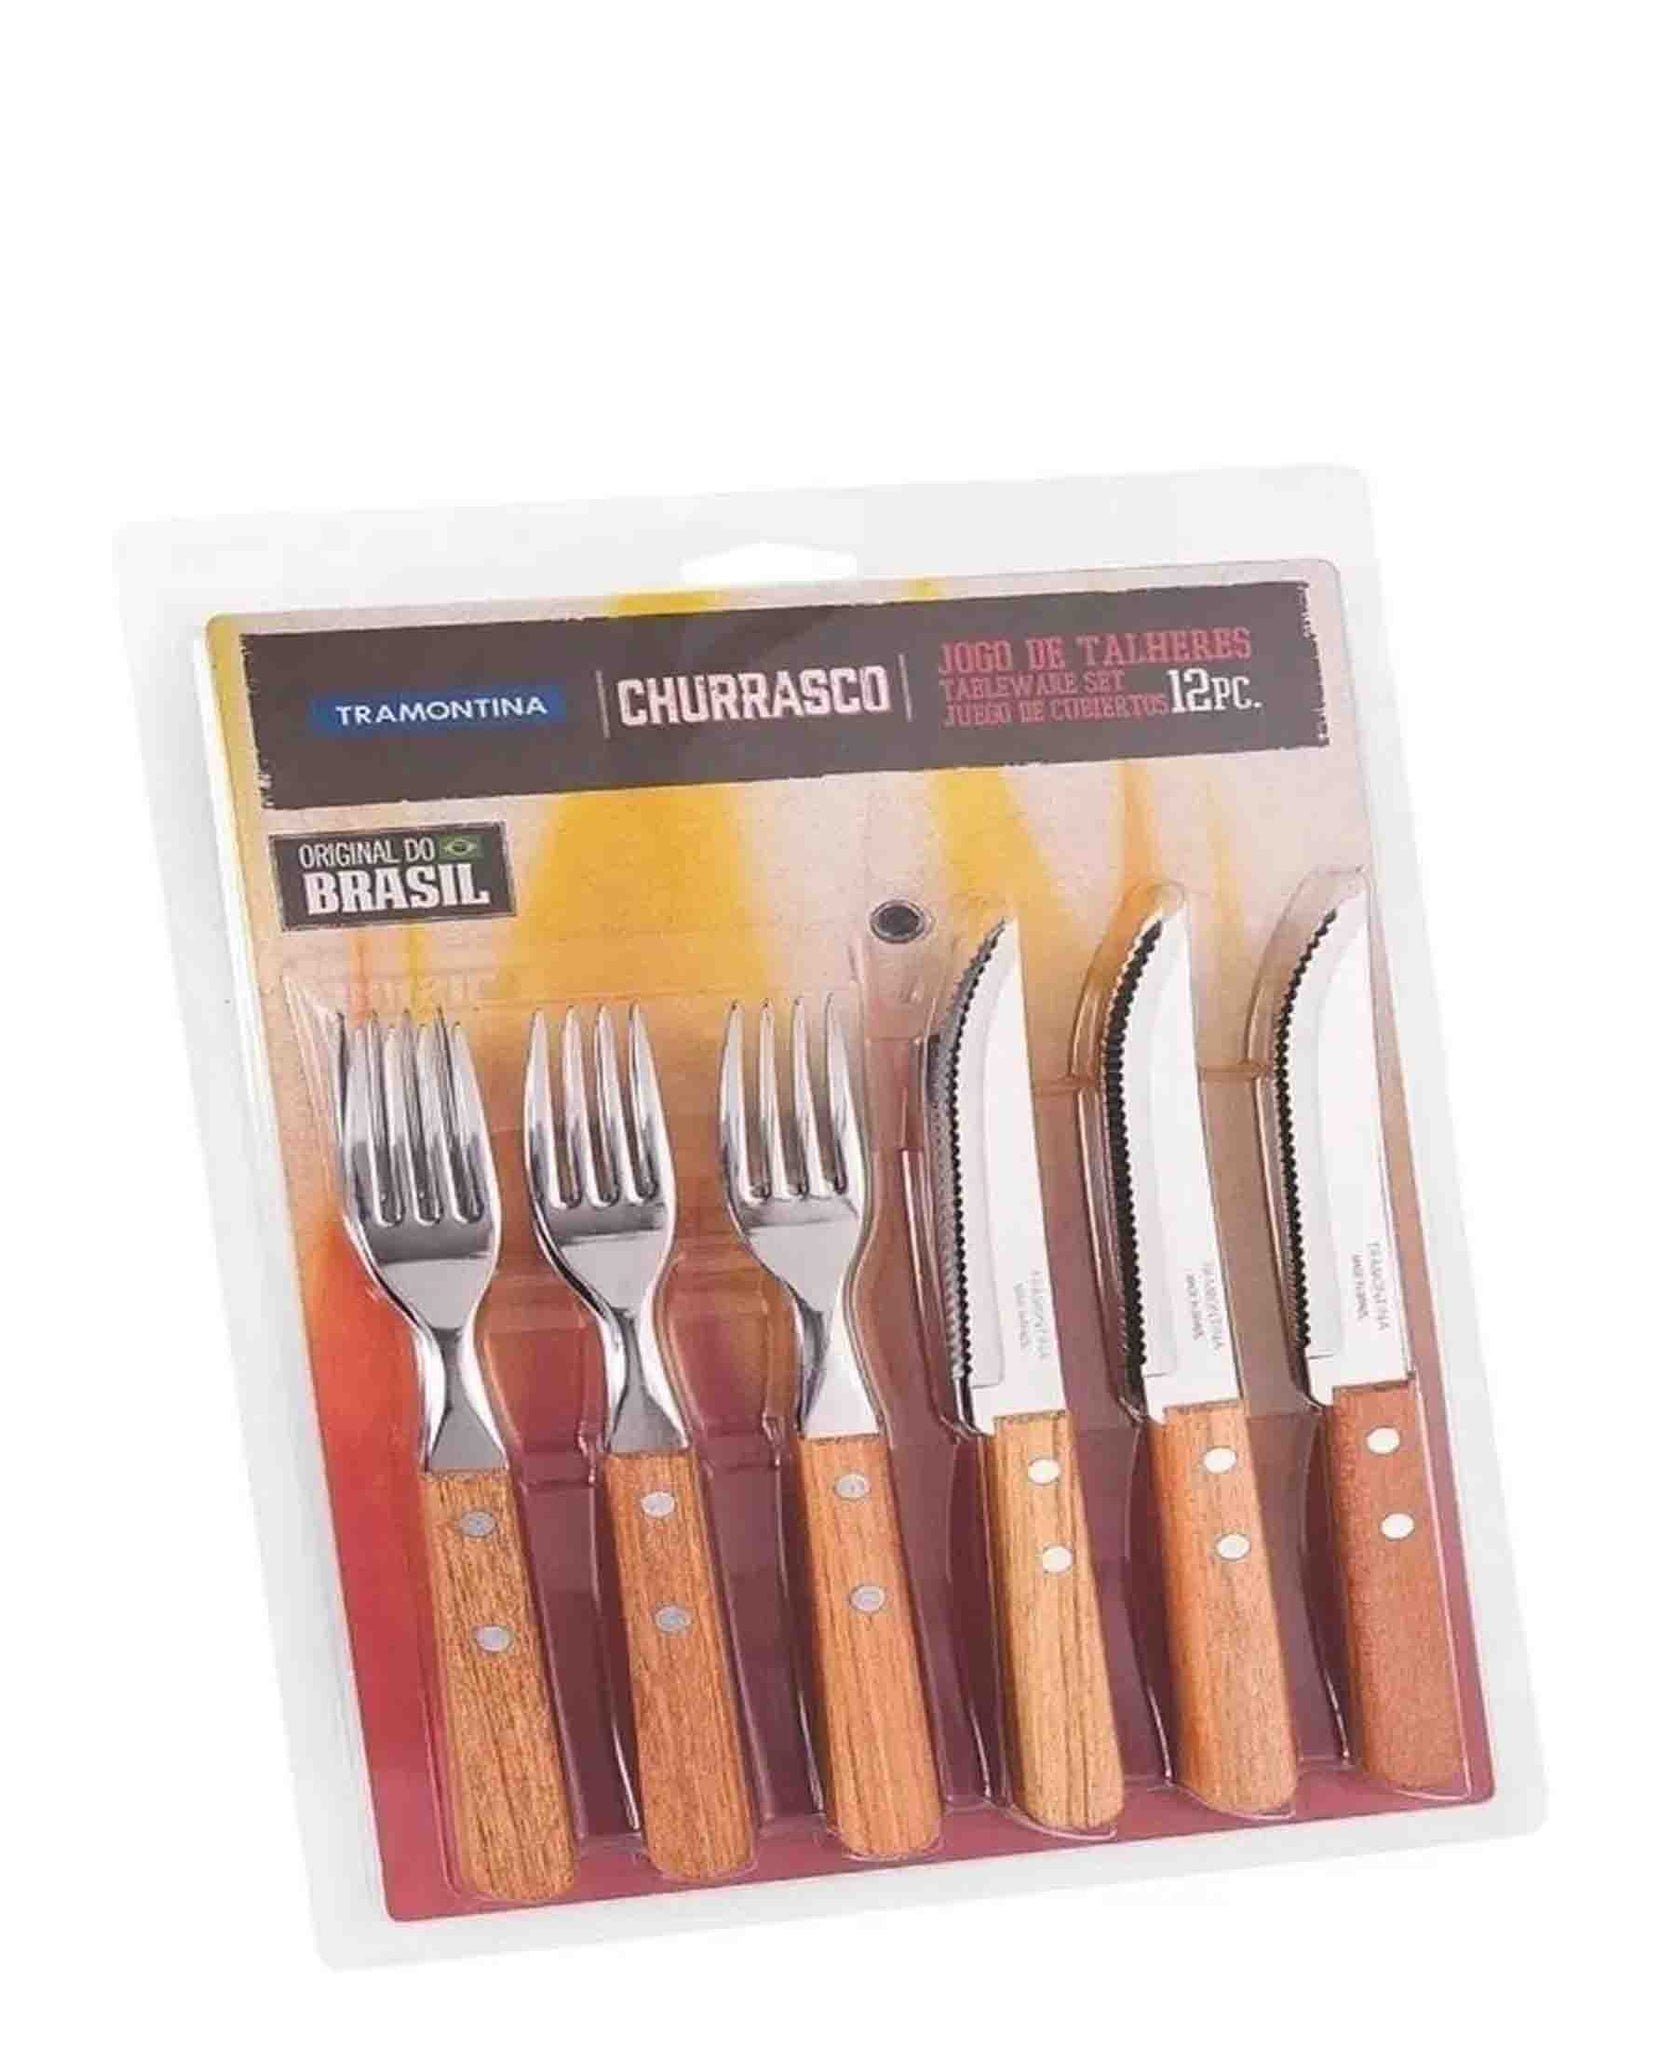 Tramontina 12 Piece Barbecue Cutlery Set - Brown